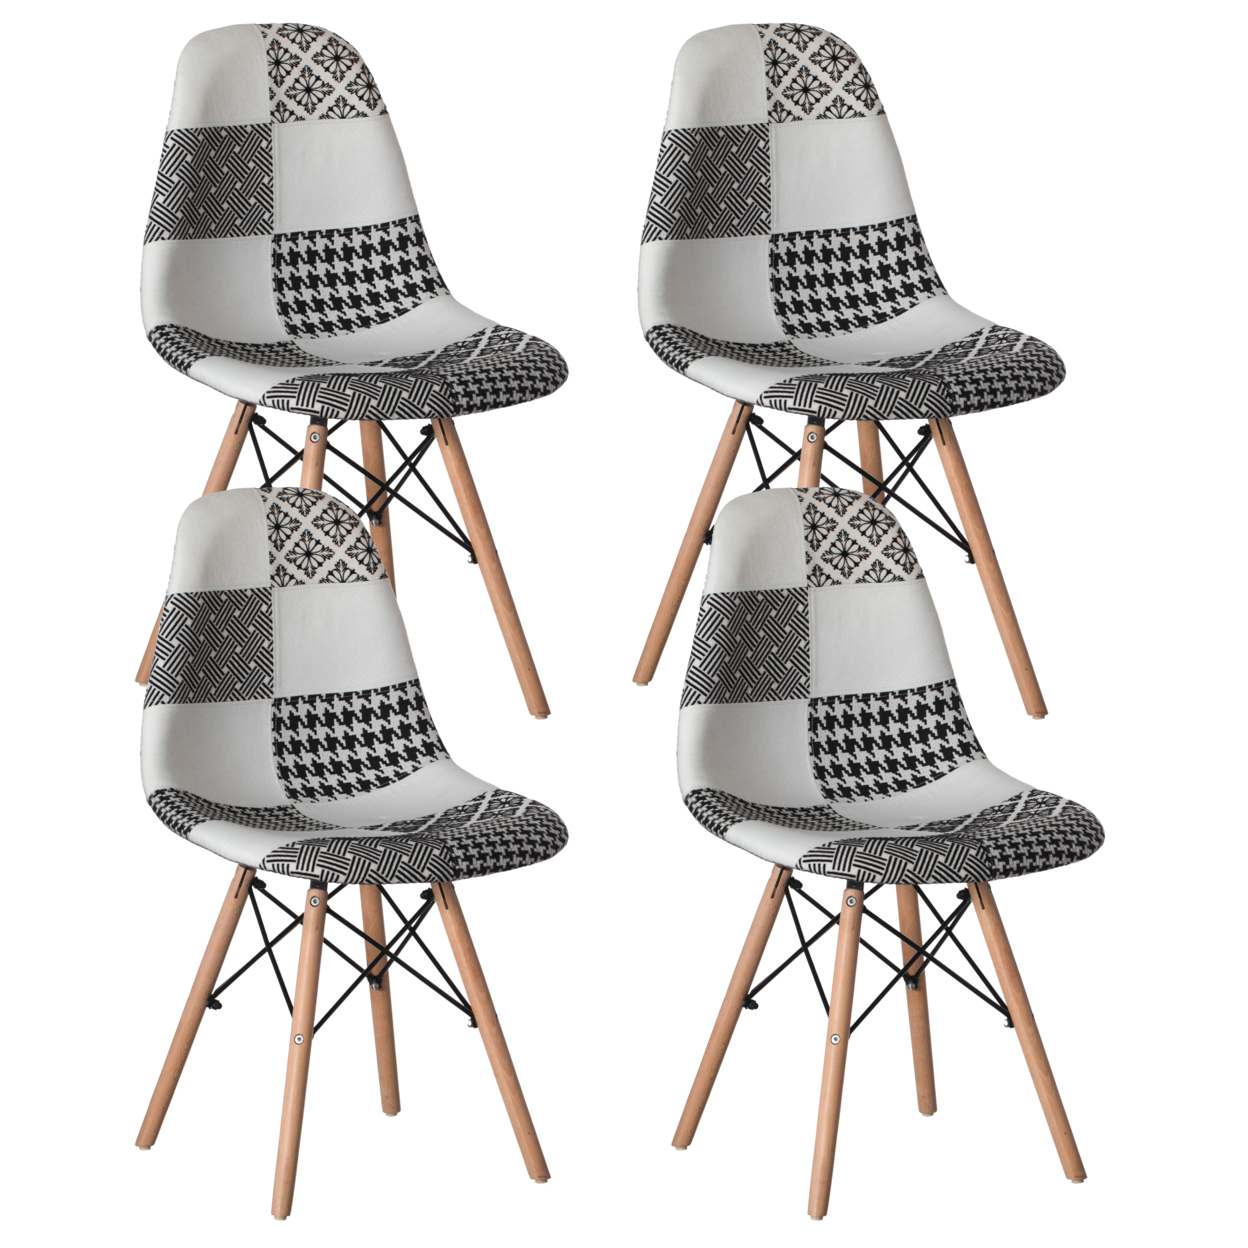 Modern Fabric Patchwork Chair With Wooden Legs For Kitchen, Dining Room, Entryway, Living Room With Black & White Patterns - Set Of 4